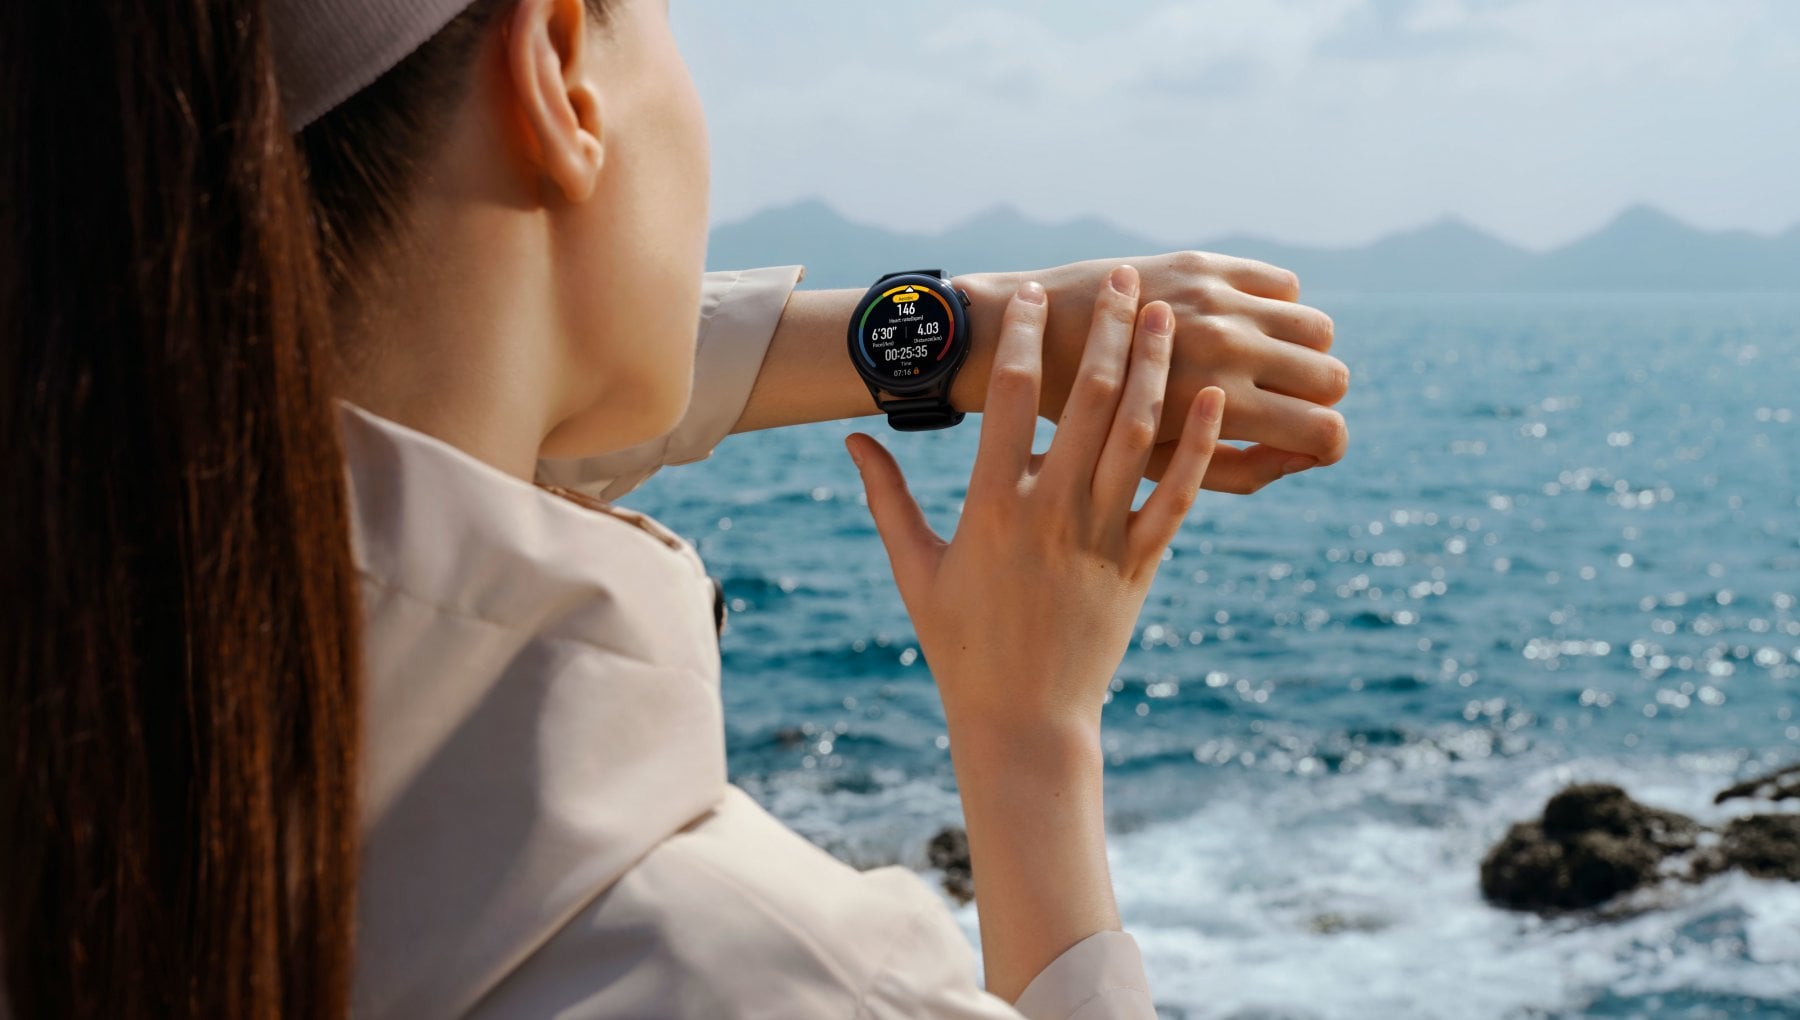 Huawei Watch 3 smartwatch receives HarmonyOS update with new features